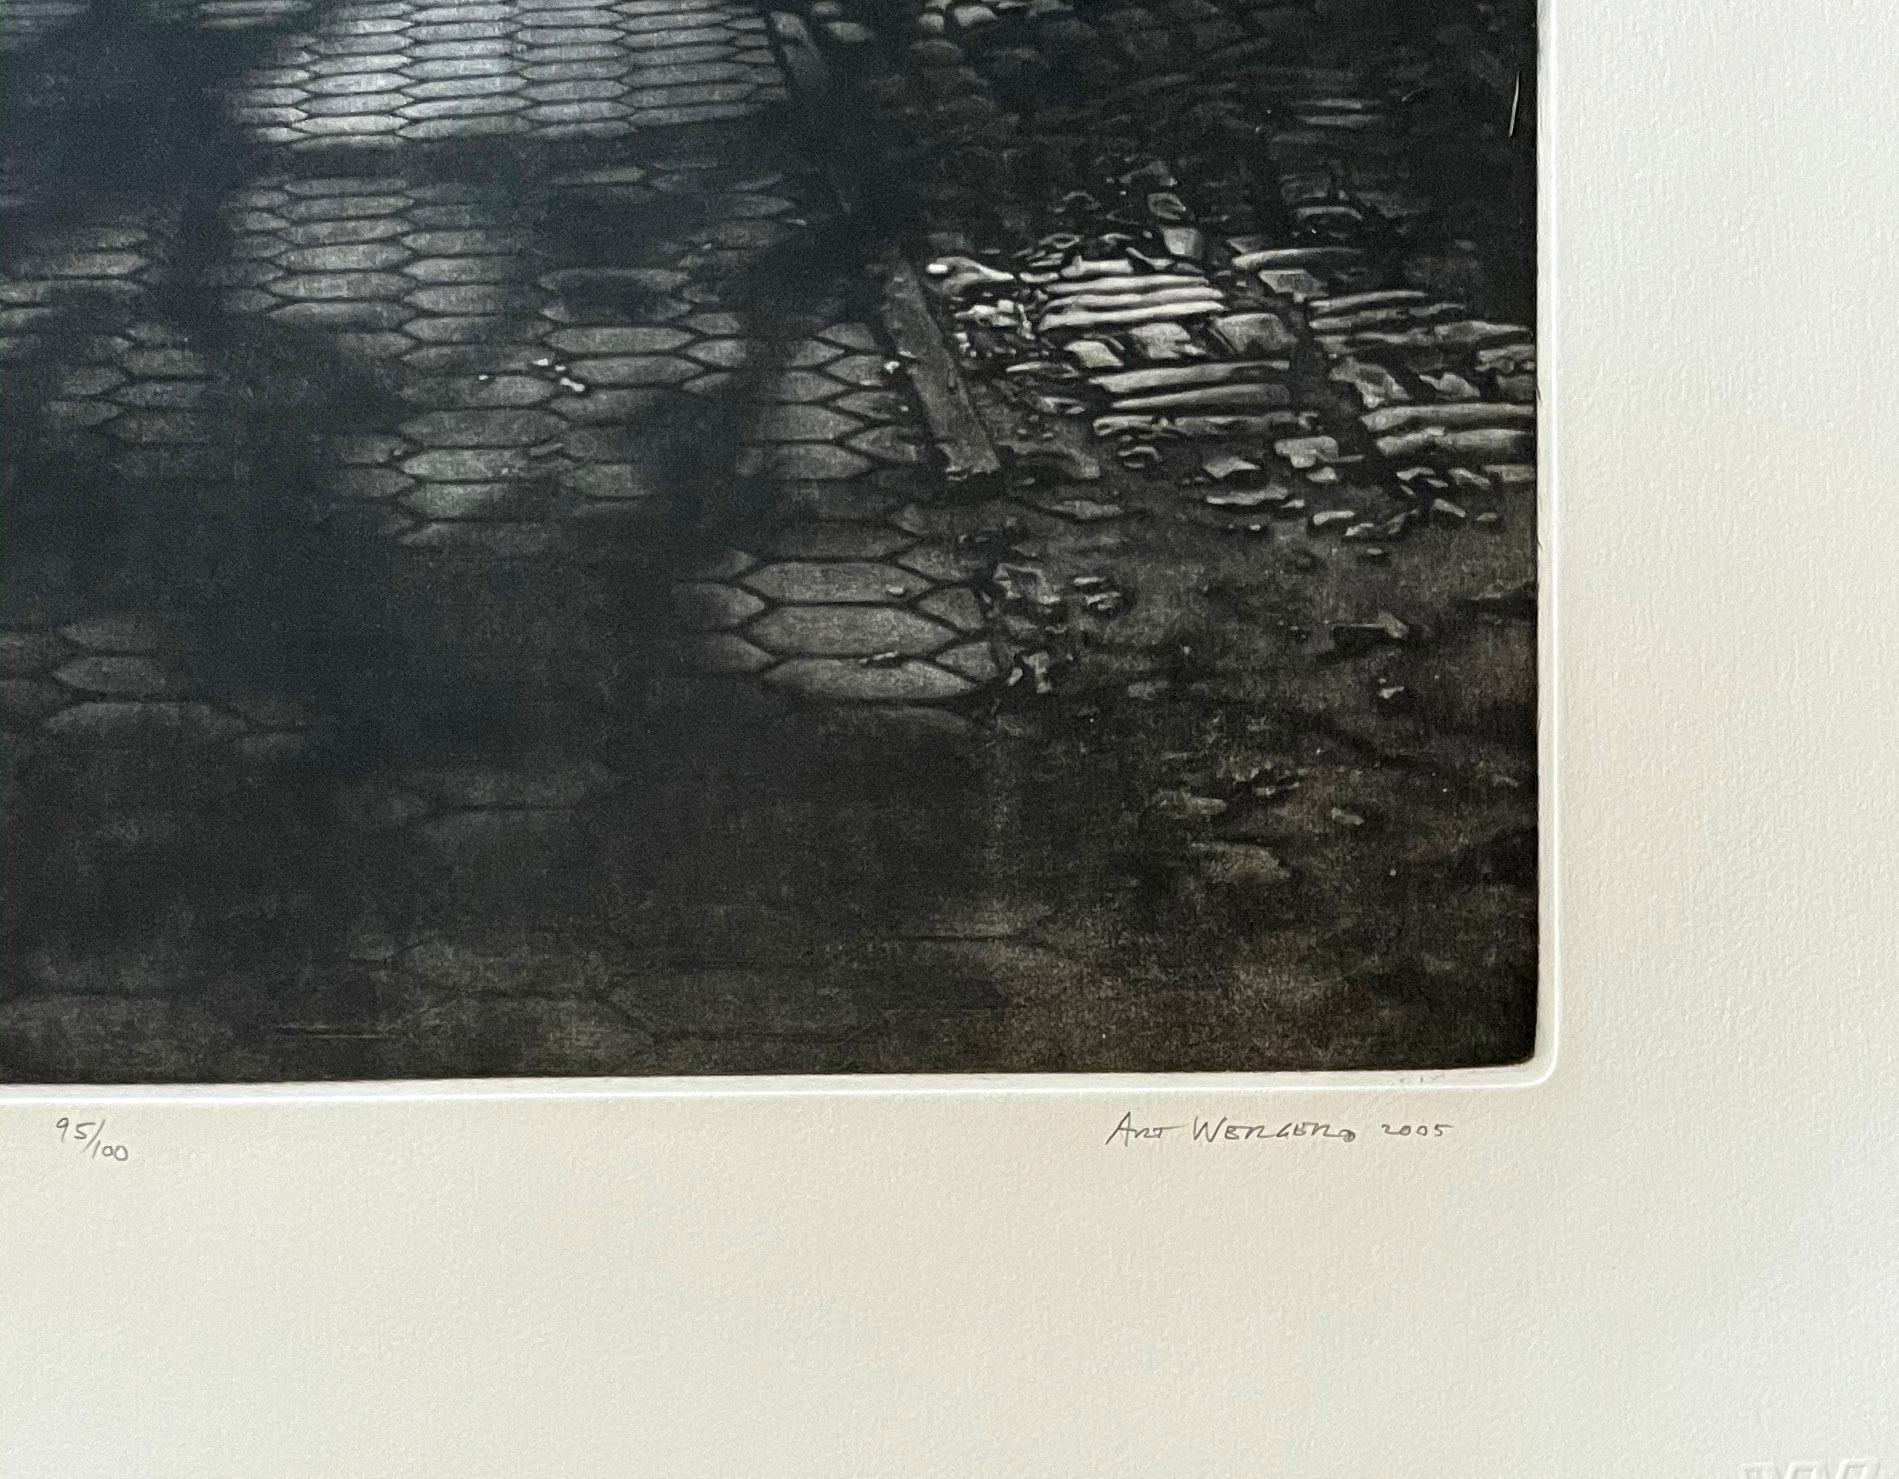 Mezzotint, from the edition of 100. Signed, titled and numbered by the artist.

Art Werger’s prints show a keen observation of quiet and normally unnoticed moments. Pedestrians passing each other, lost in their own worlds. Sunlight filtering through